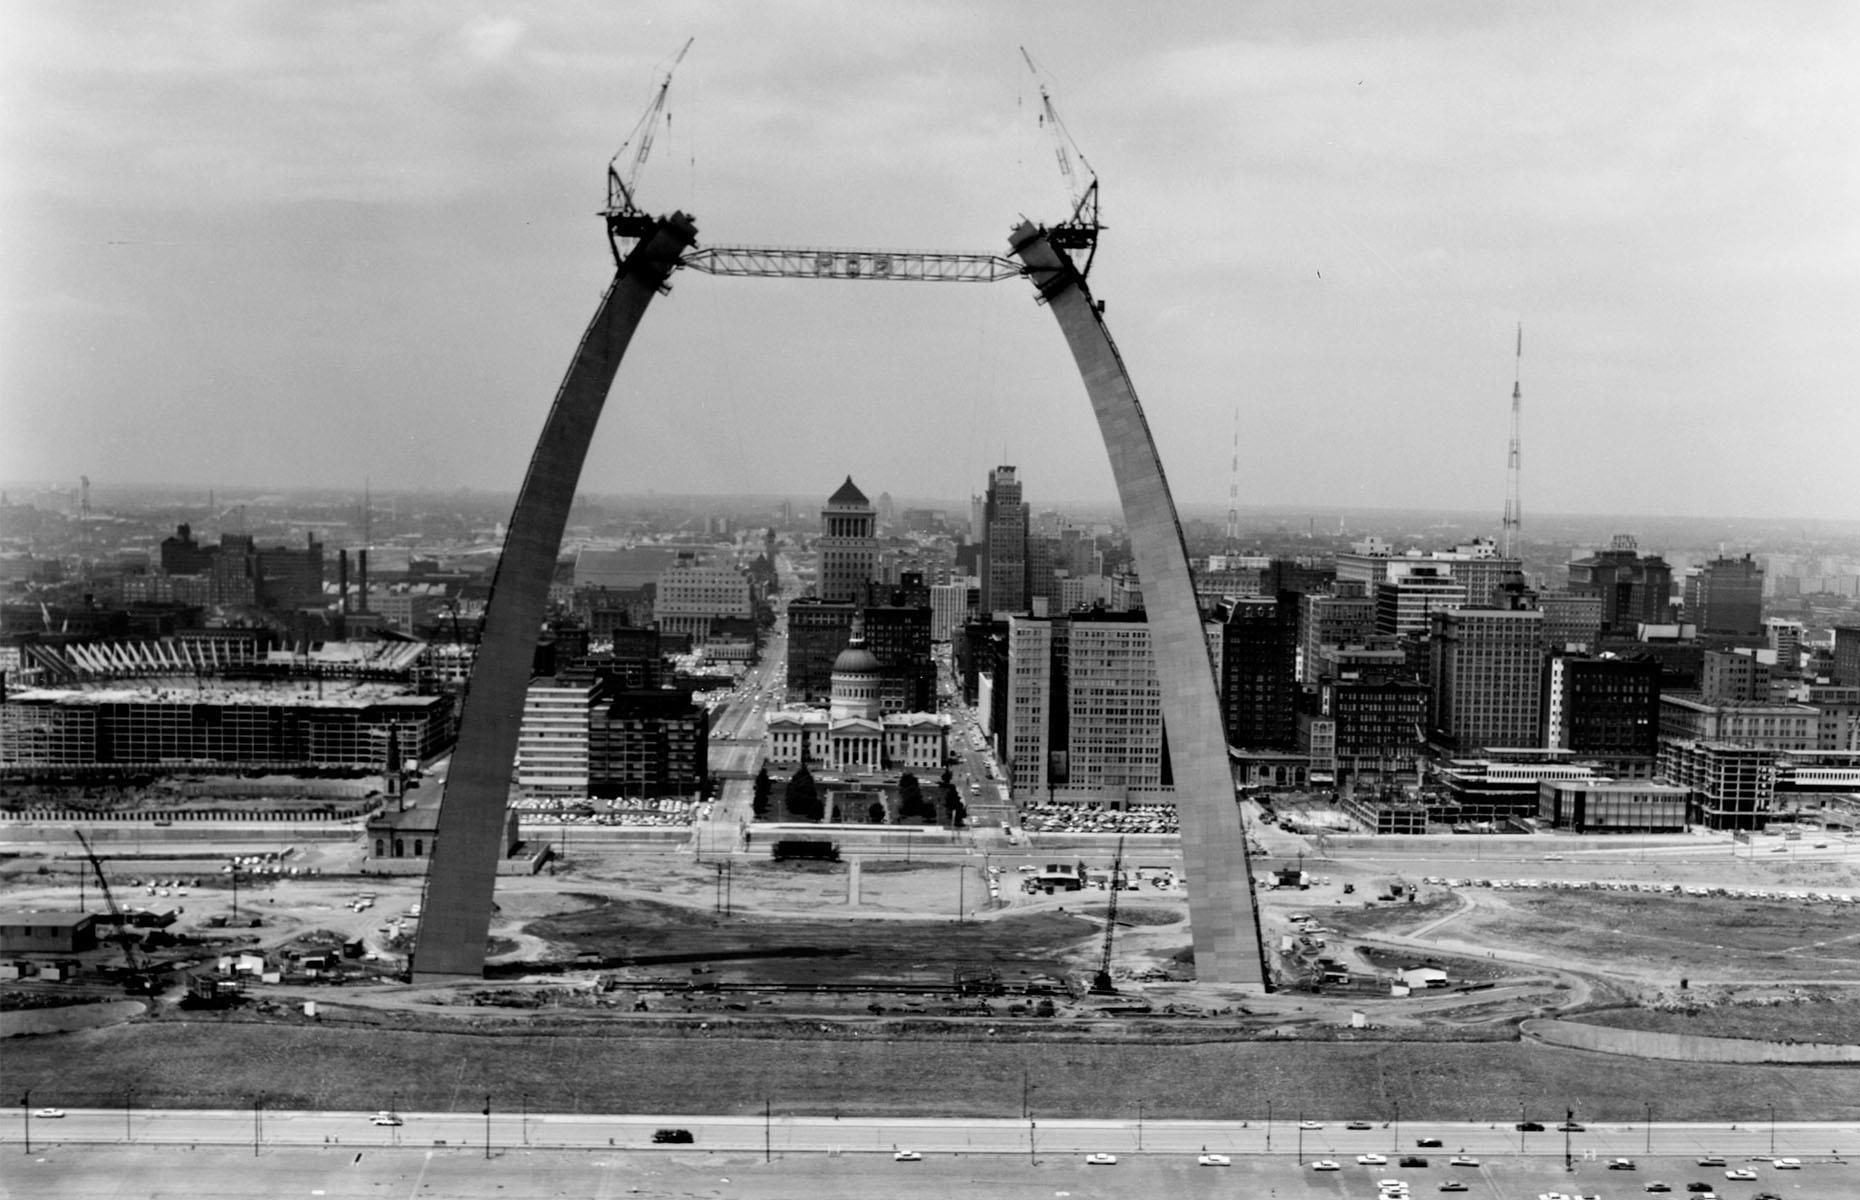 St. Louis’ famous Gateway Arch was built between 1963 and 1965 and was created to symbolise the movement of settlers towards the American west, a concept pioneered by Thomas Jefferson. Pictured here towards the end of its construction in 1965, the arch’s final keystone is thought to contain a time capsule filled with letters written by more than 760,000 local people.